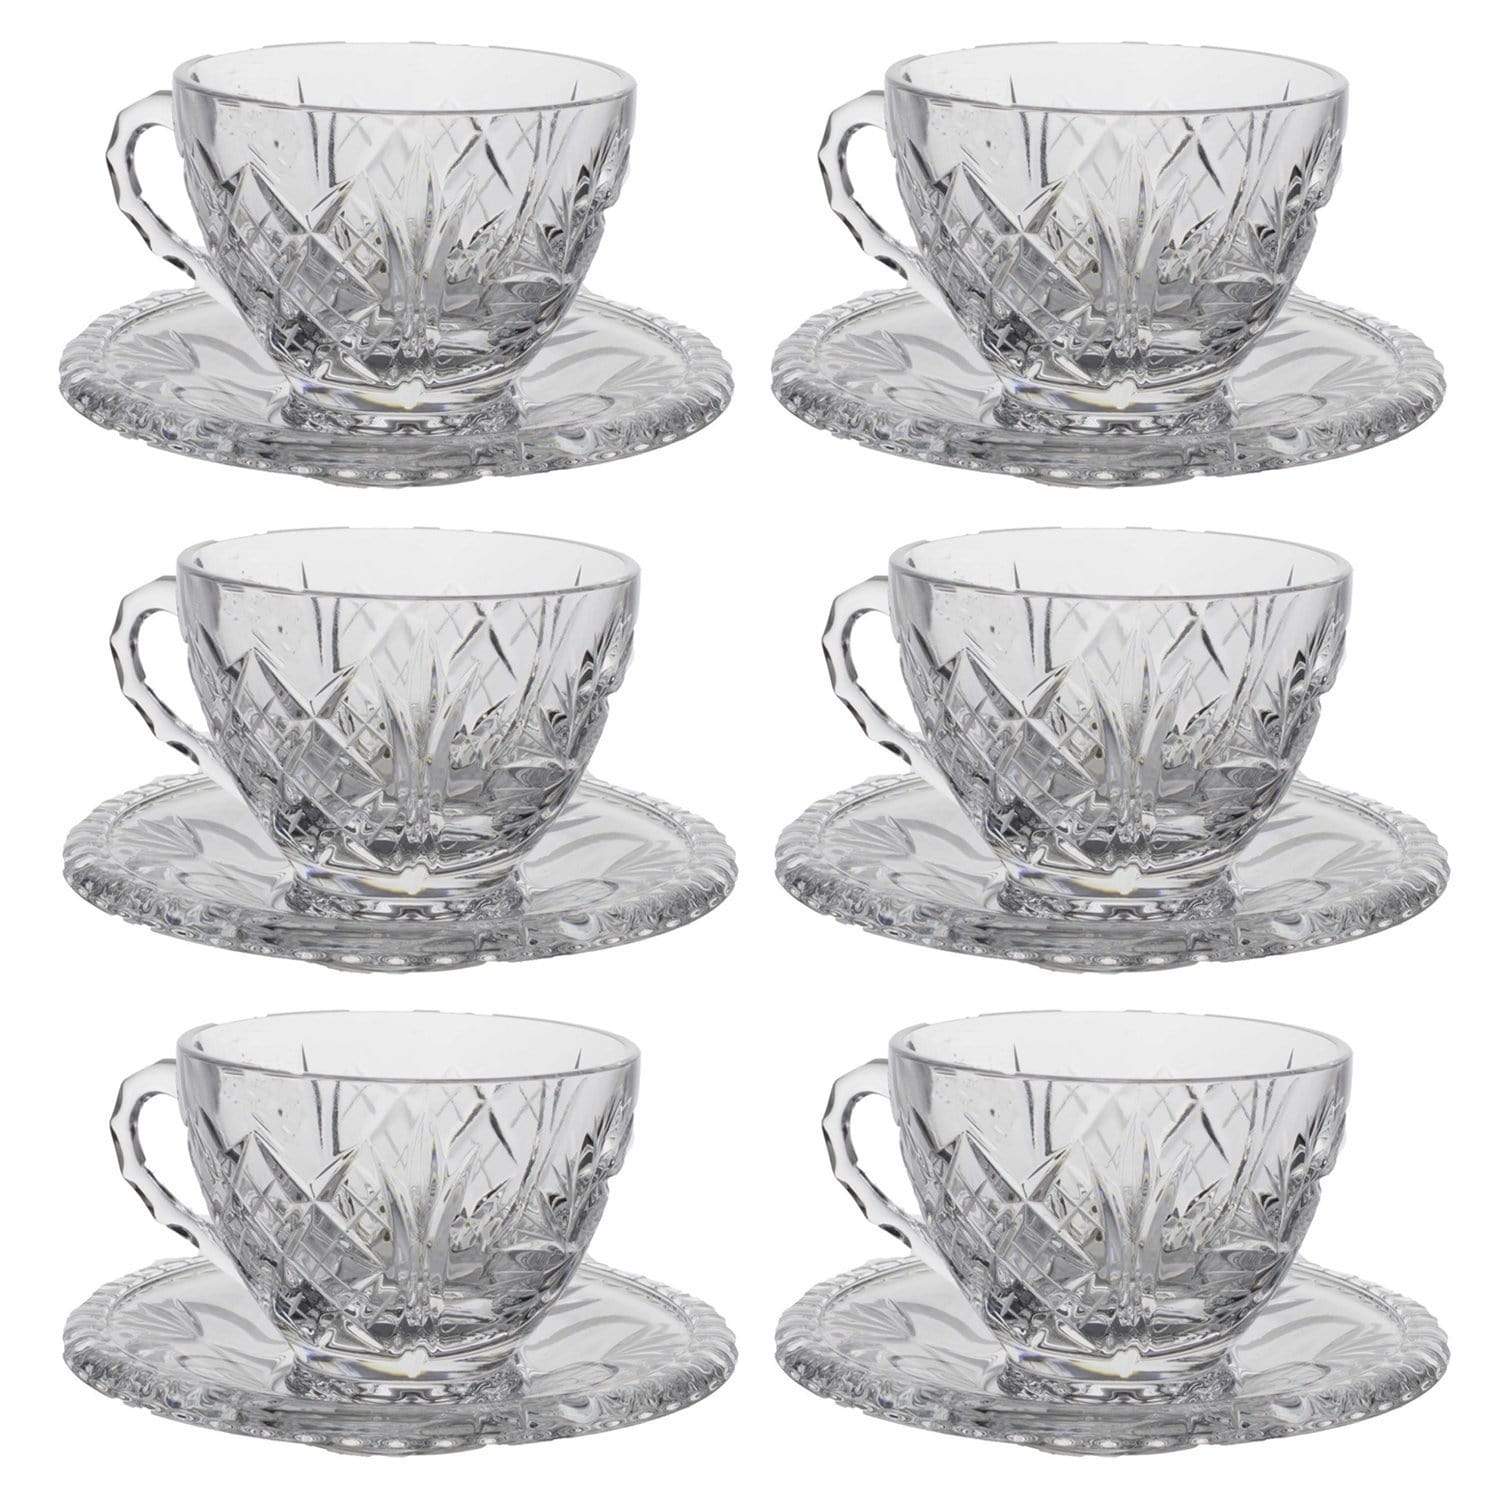 Bohemia Crystal Glass Sherine Cup and Saucer Set - Clear, 26008_623 - 5392132 - Jashanmal Home